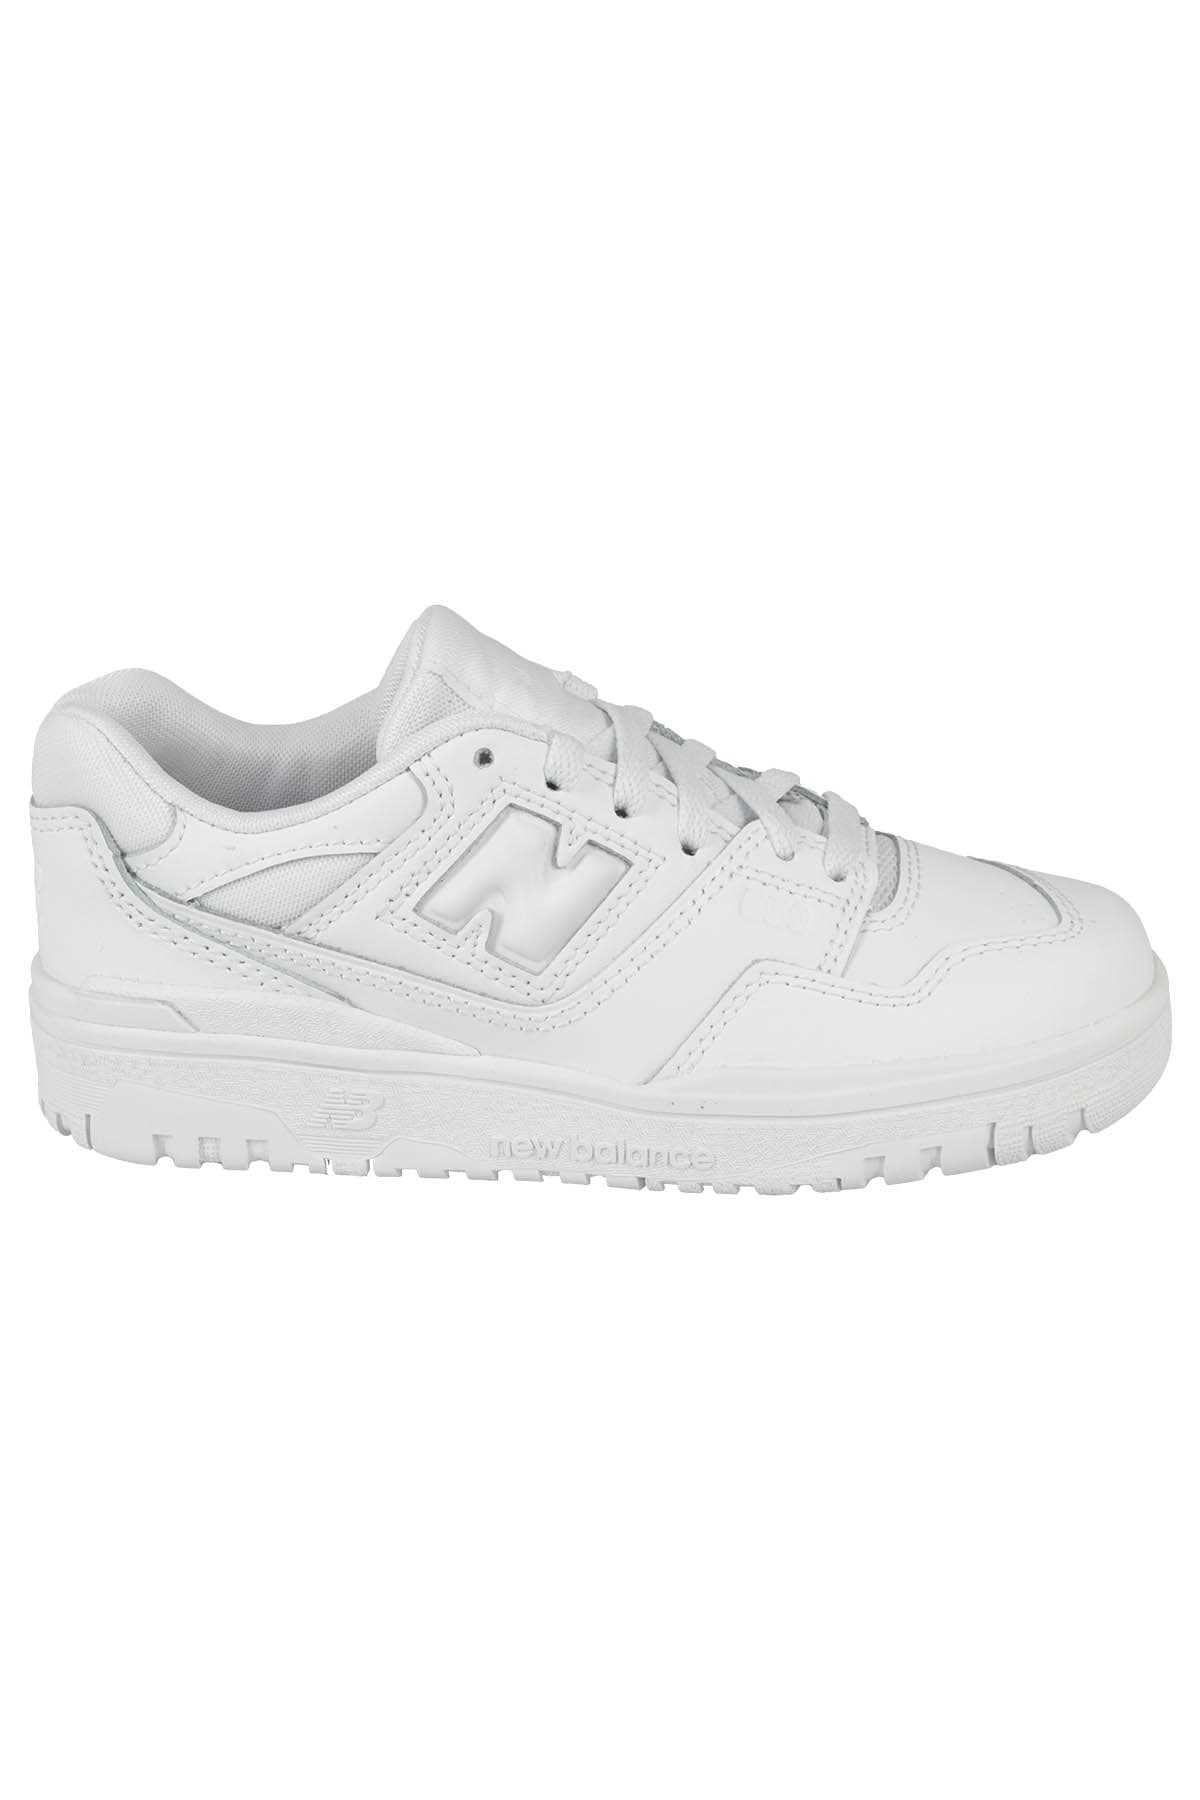 New Balance Kids' Synthetic Textile In White